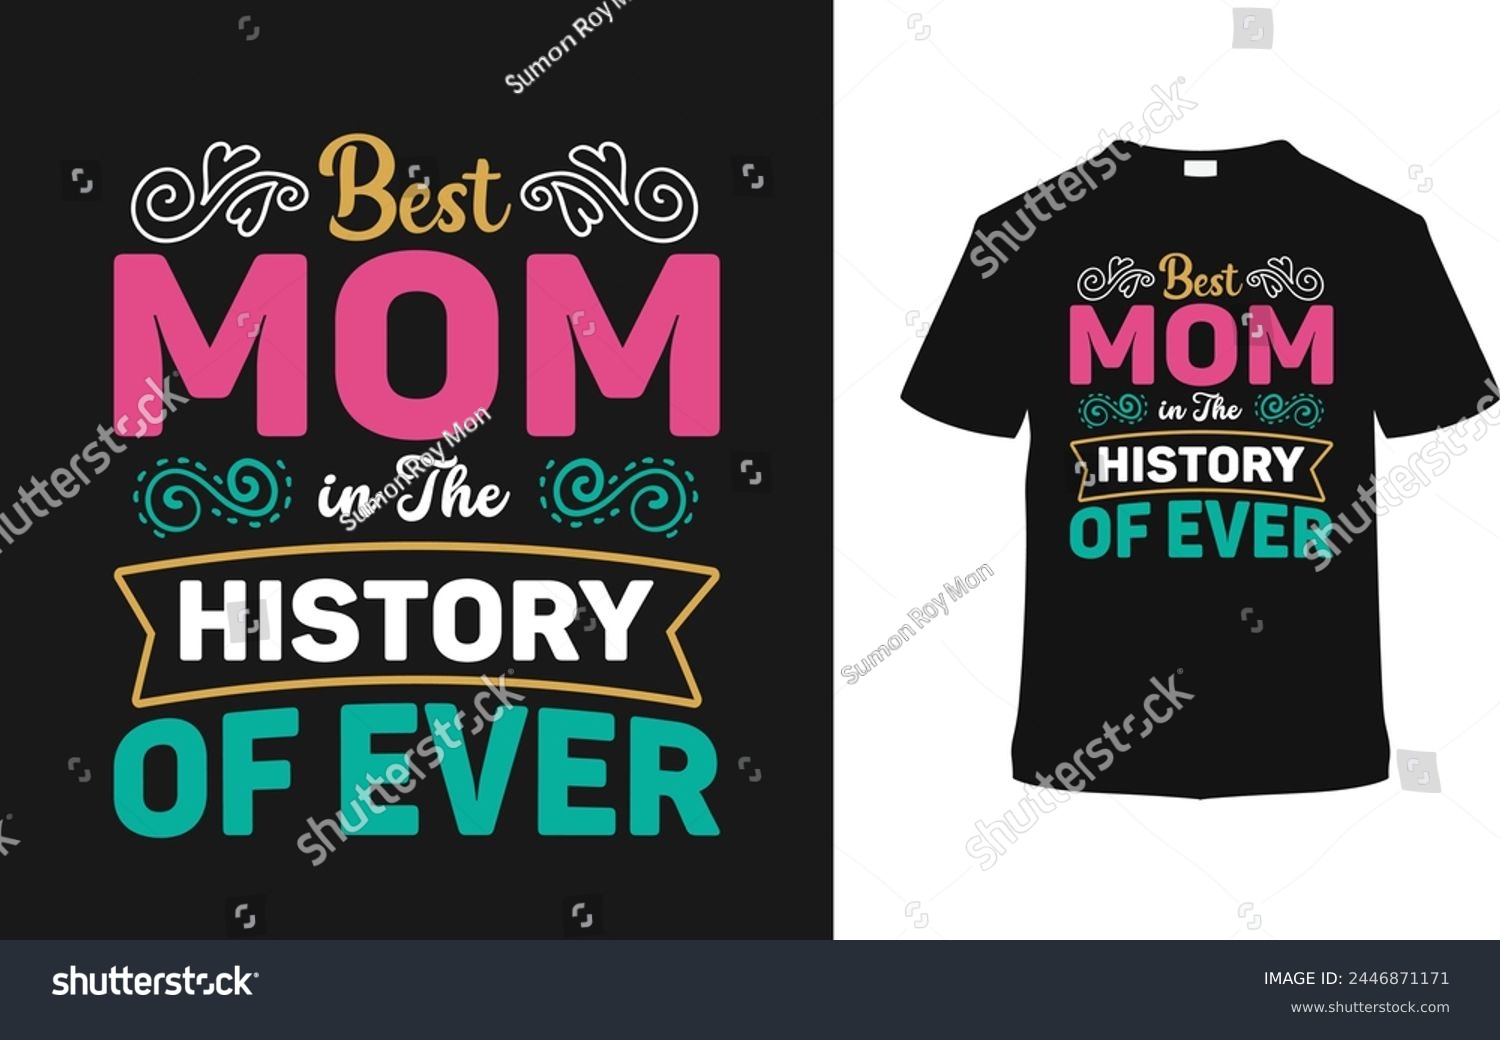 SVG of Best Mom In The History Of Ever Mother's Day T shirt Design, vector illustration, graphic template, print on demand, typography, vintage, retro style, element, apparel, mothers t-shirt, mom tee svg